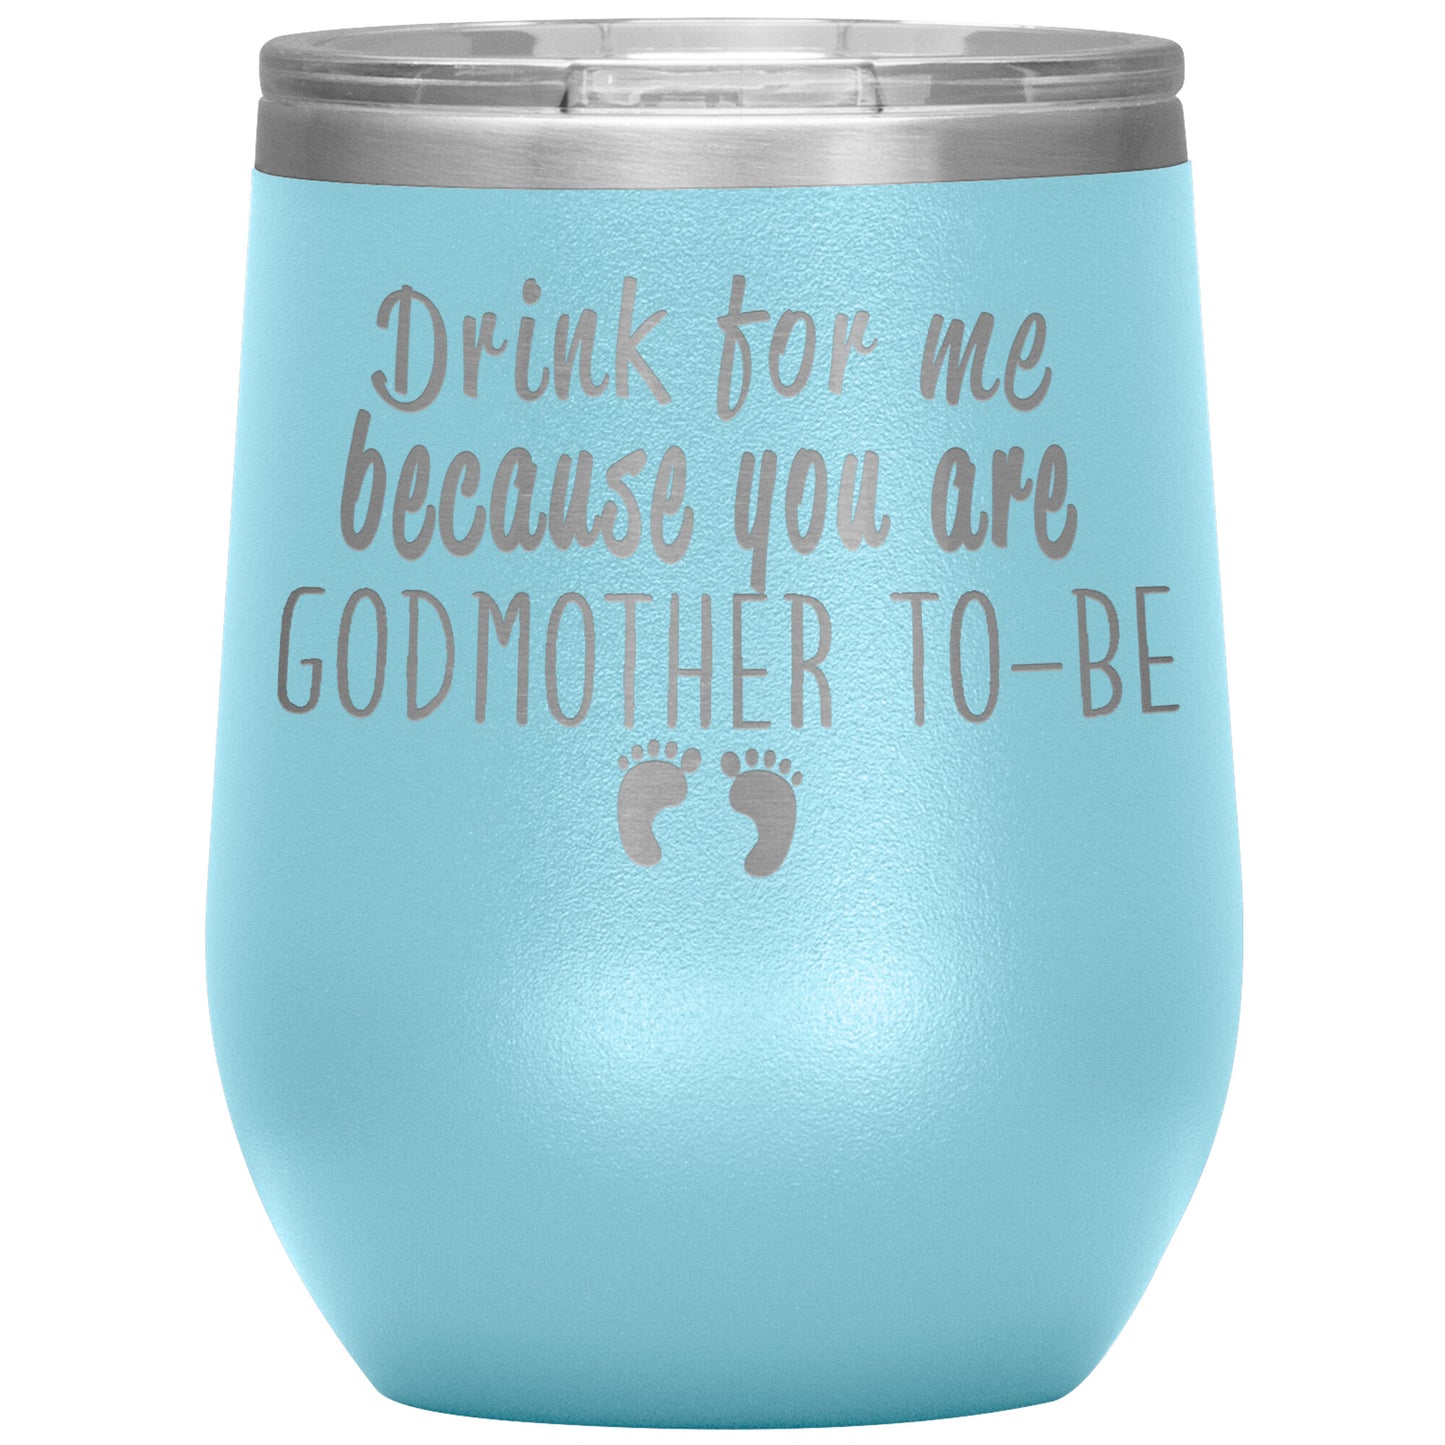 Drink For Me Godmother To Be Tumbler